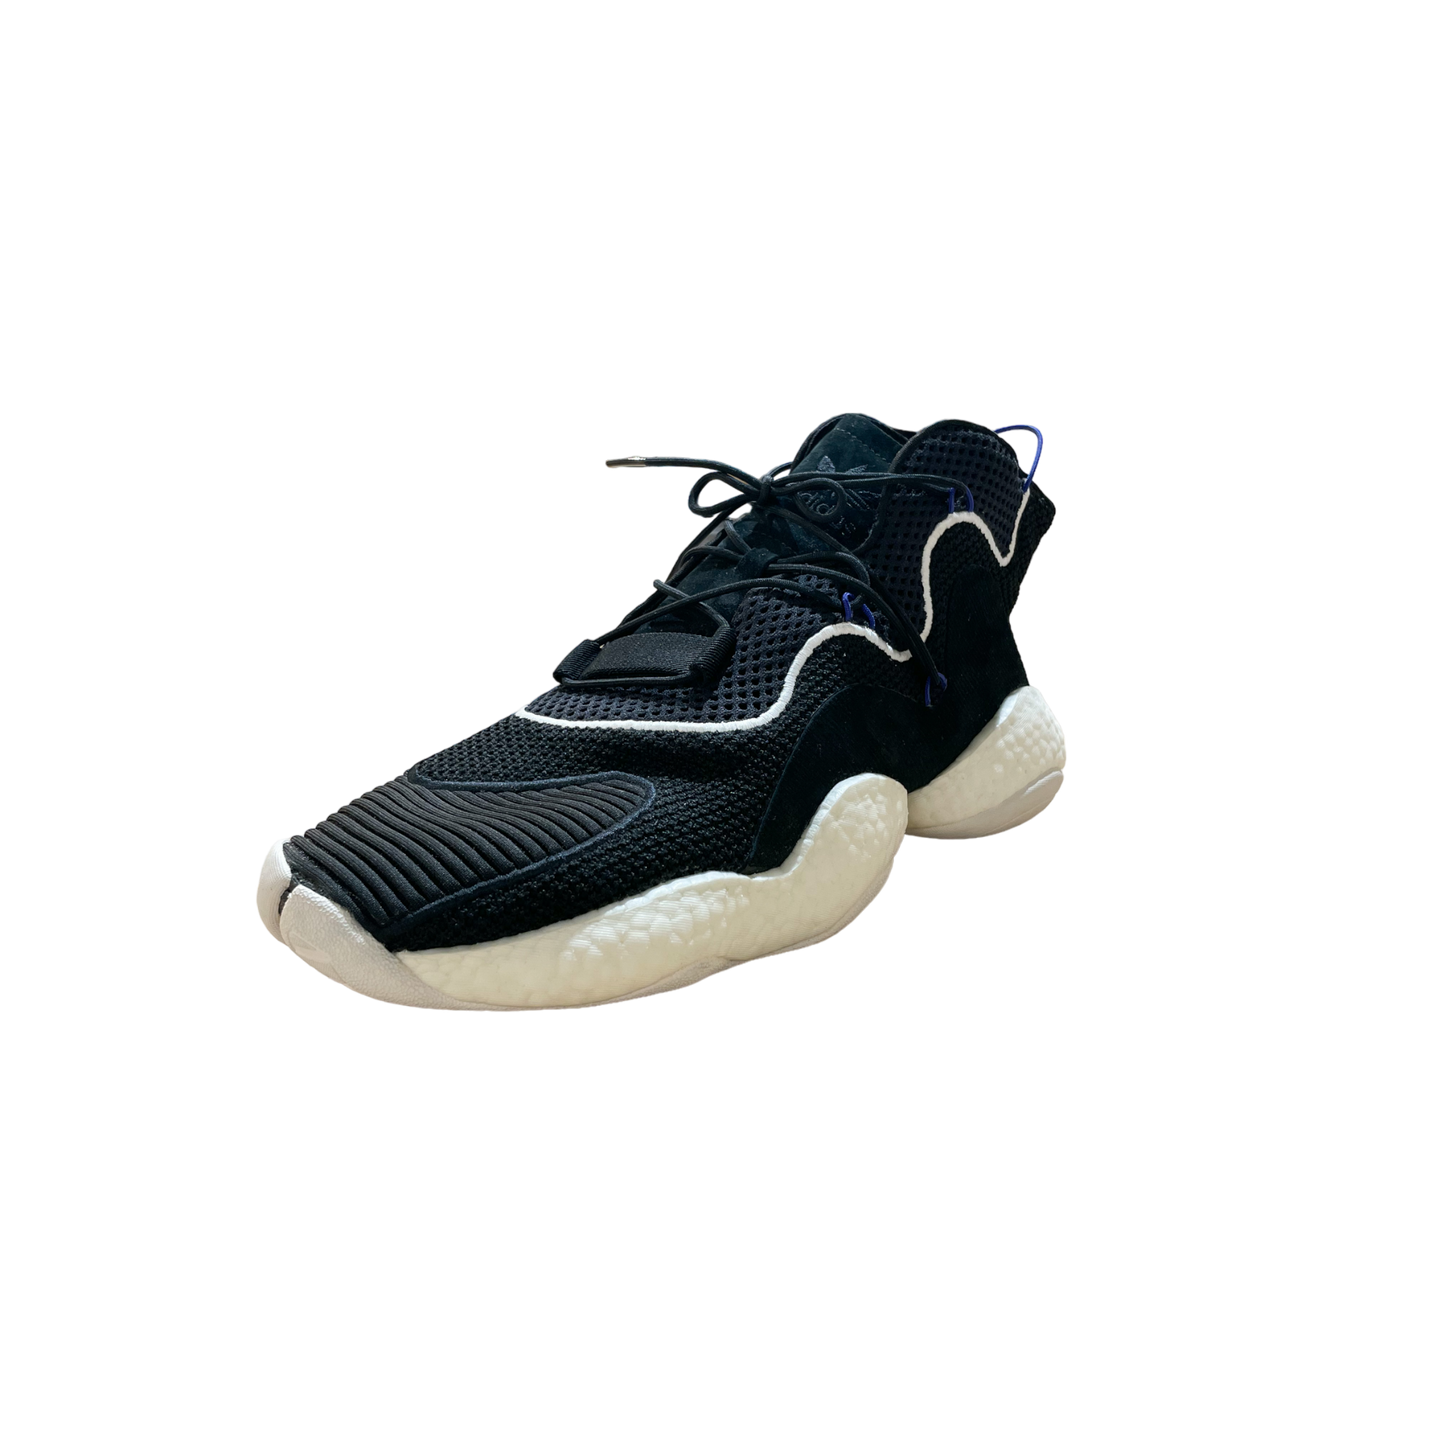 Adidas Crazy BYW LVL 1 Black White (Used/Refreshed)